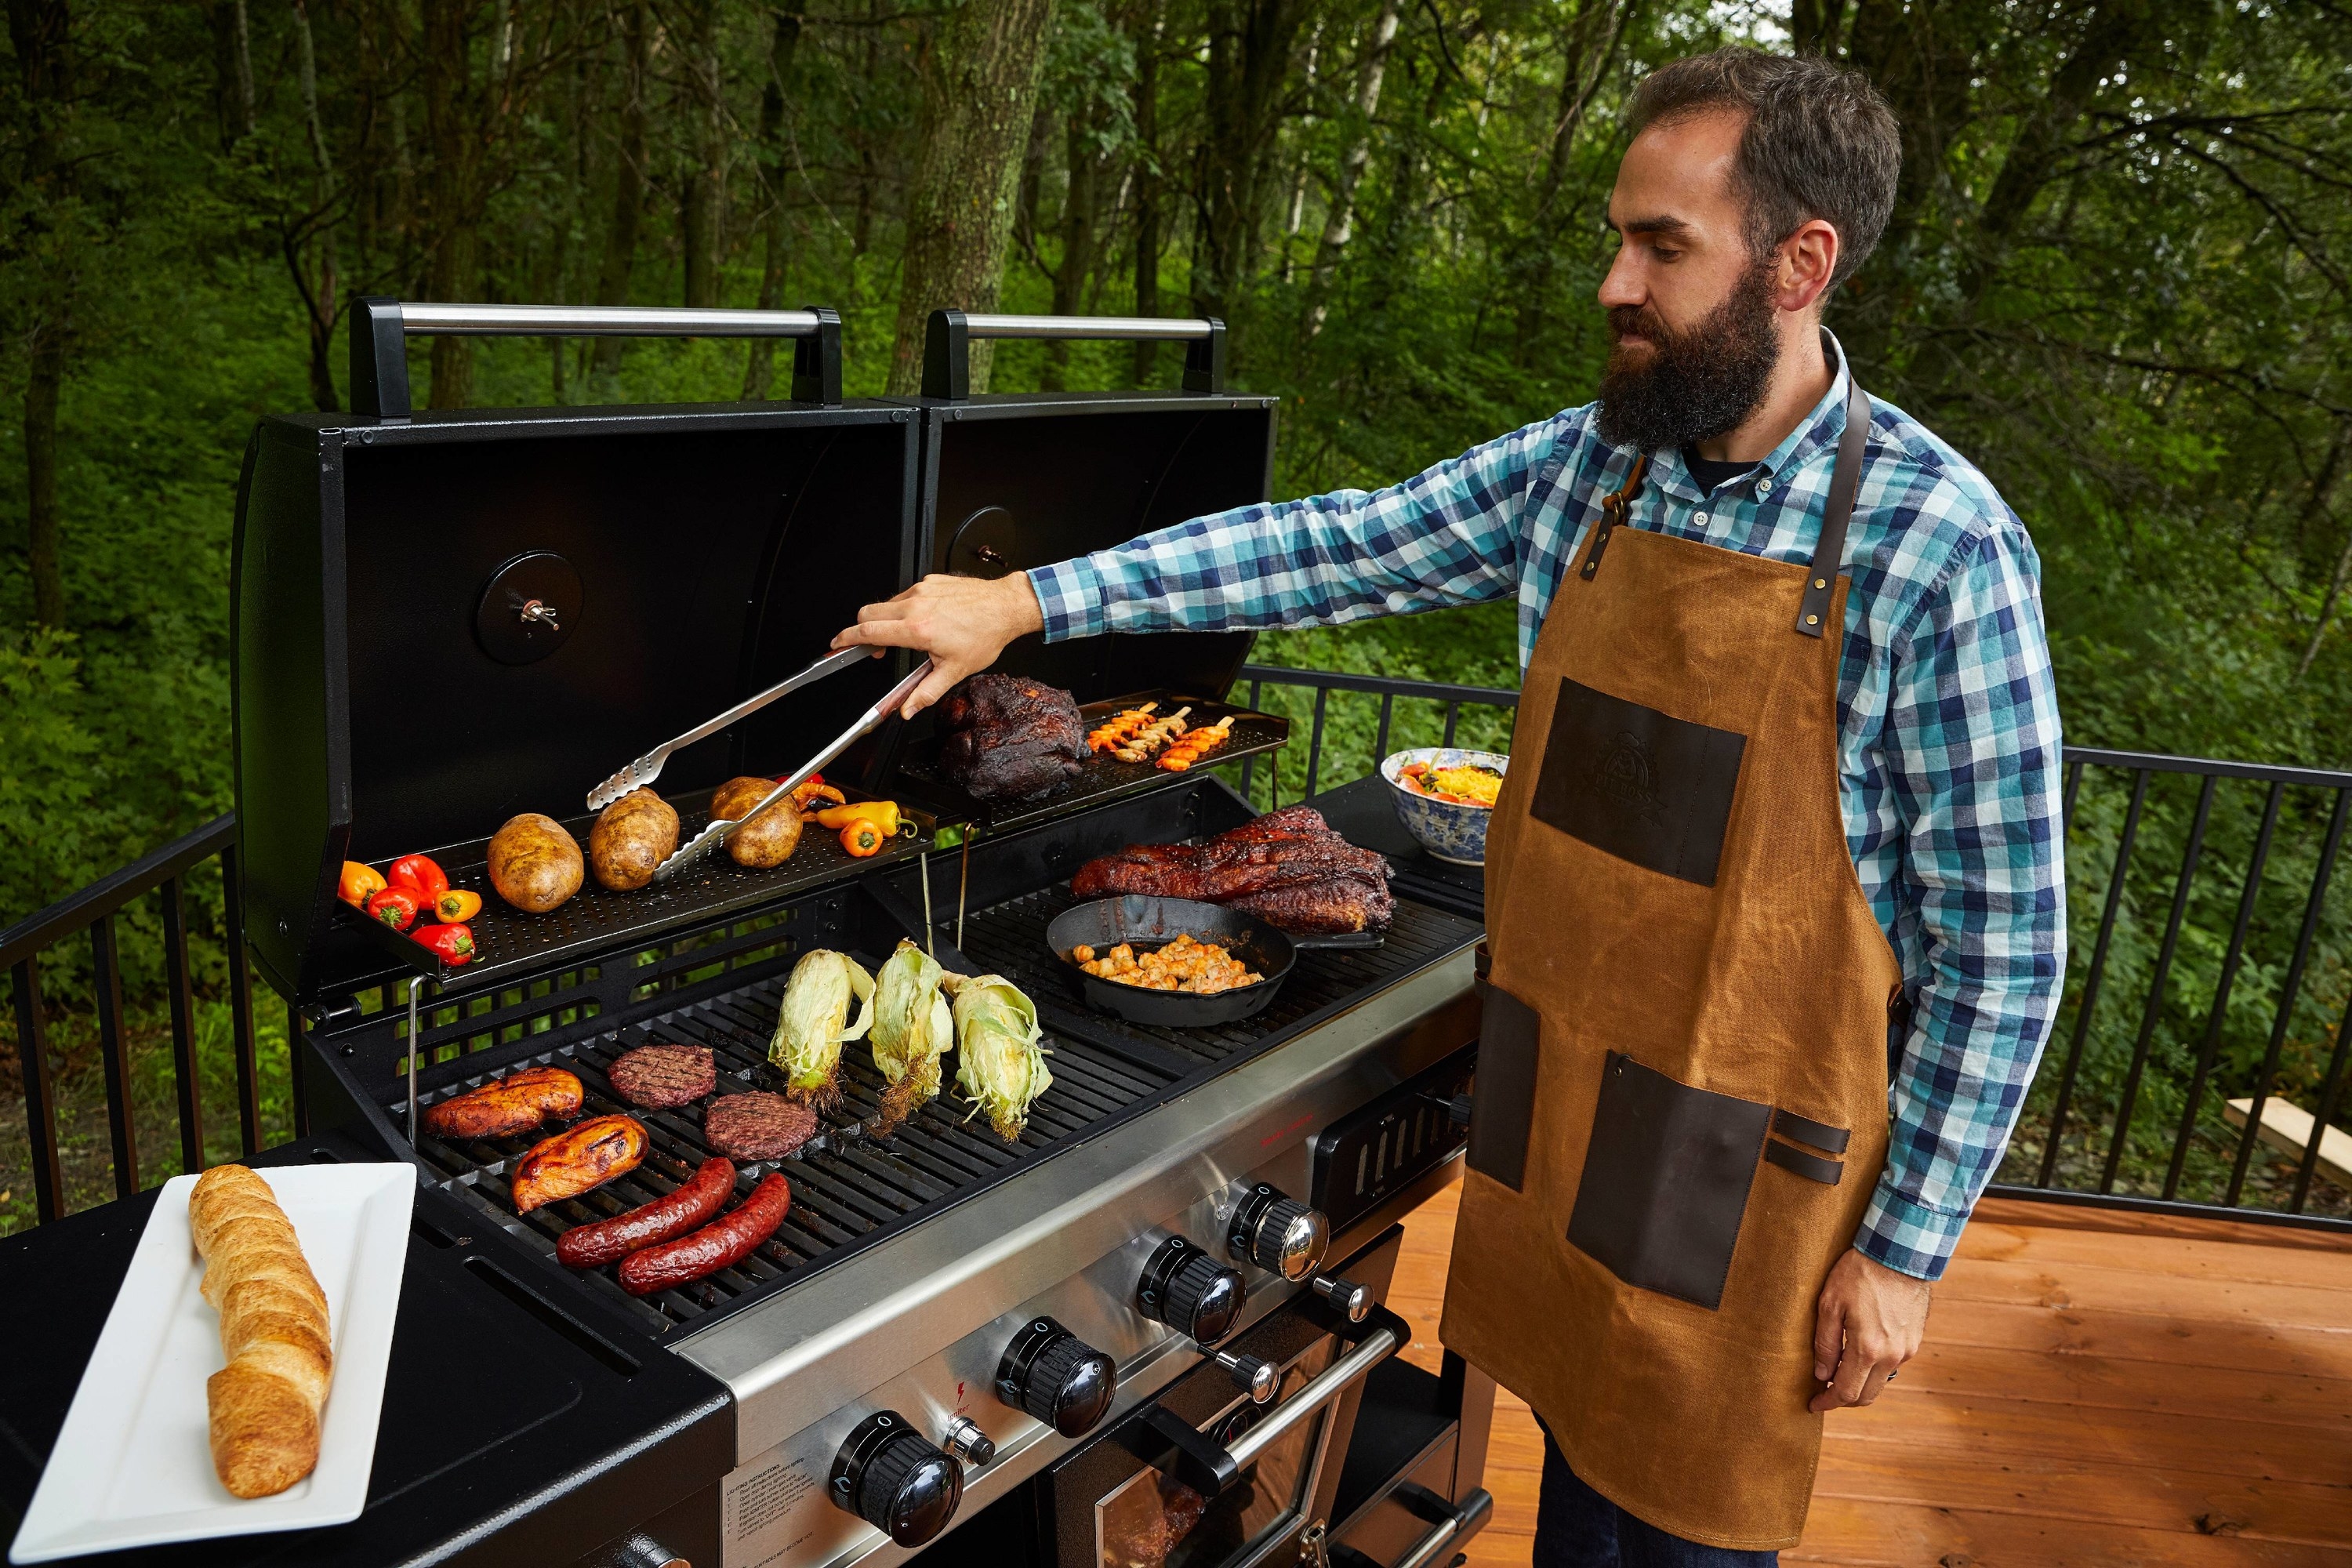 A person grilling while wearing the apron